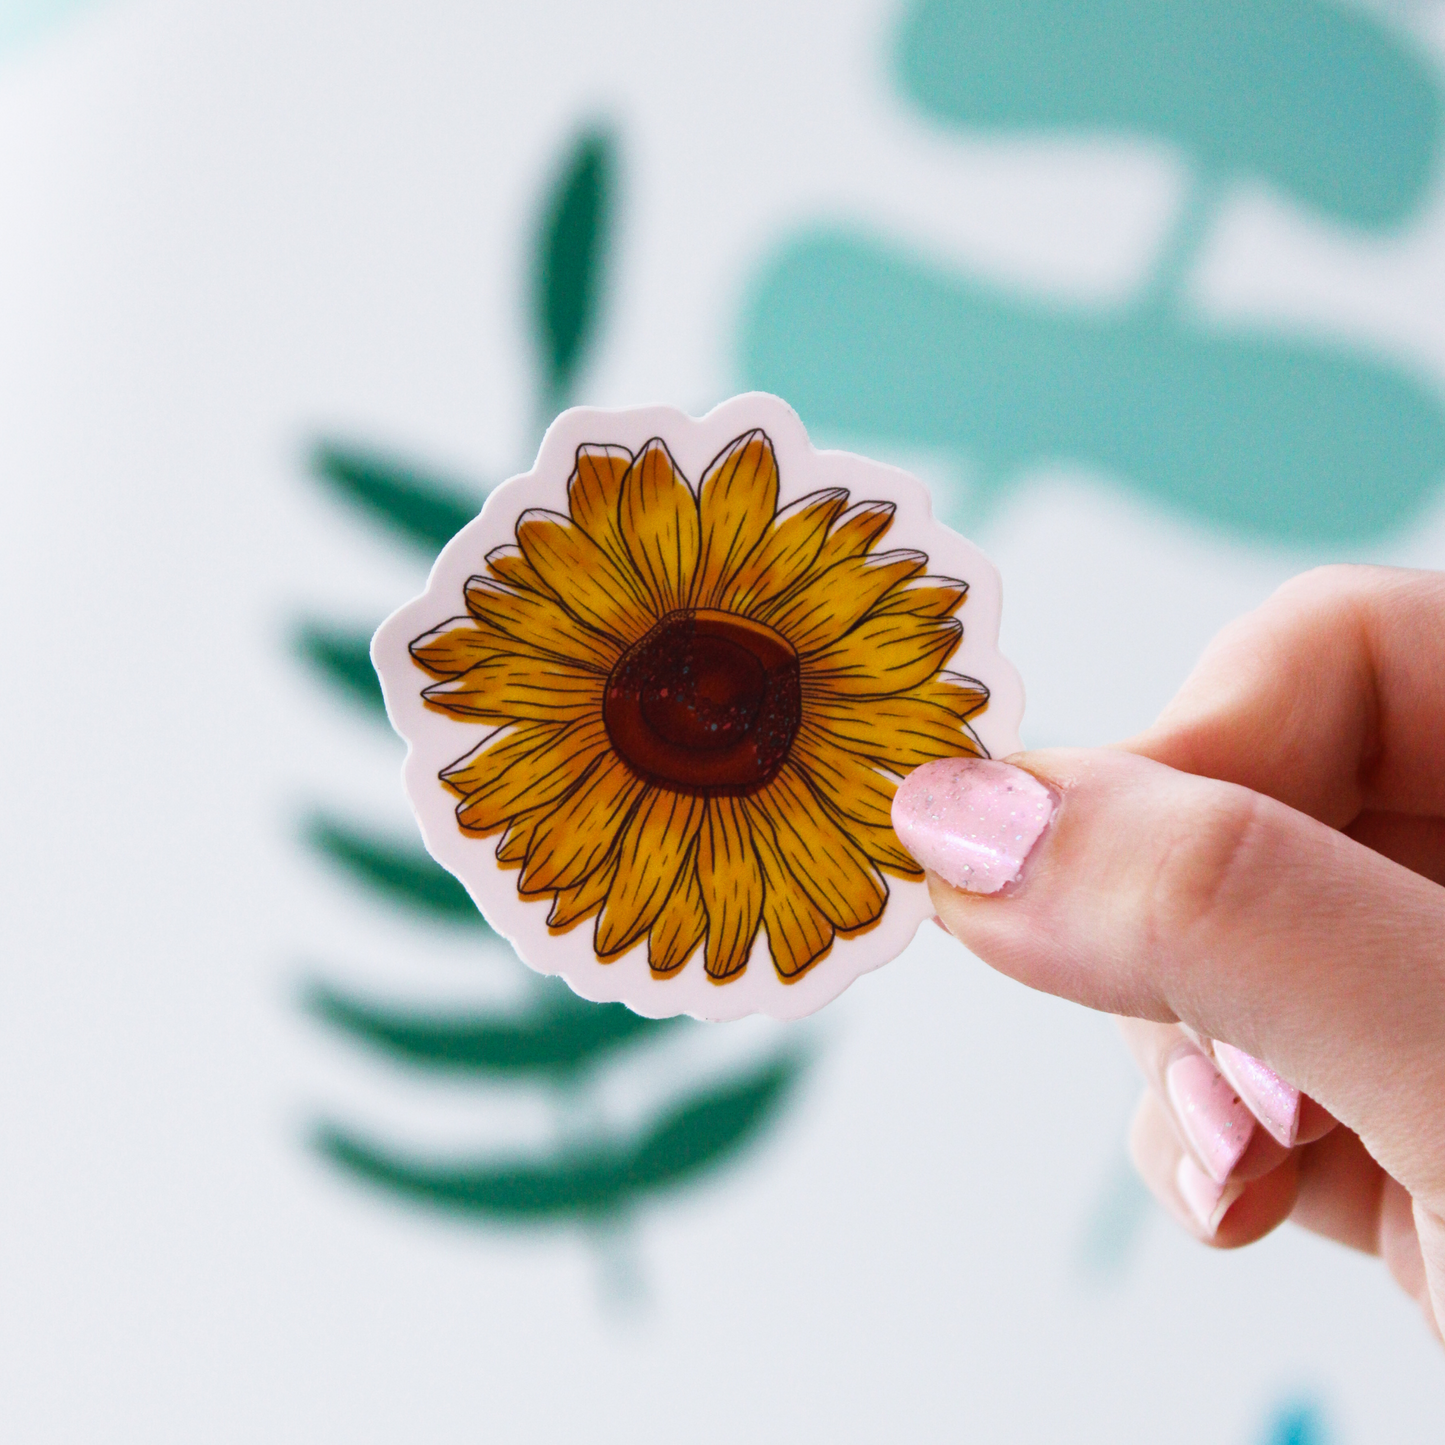 Blurred out leaf pattern in the background with a hand holding a yellow sunflower sticker in the front